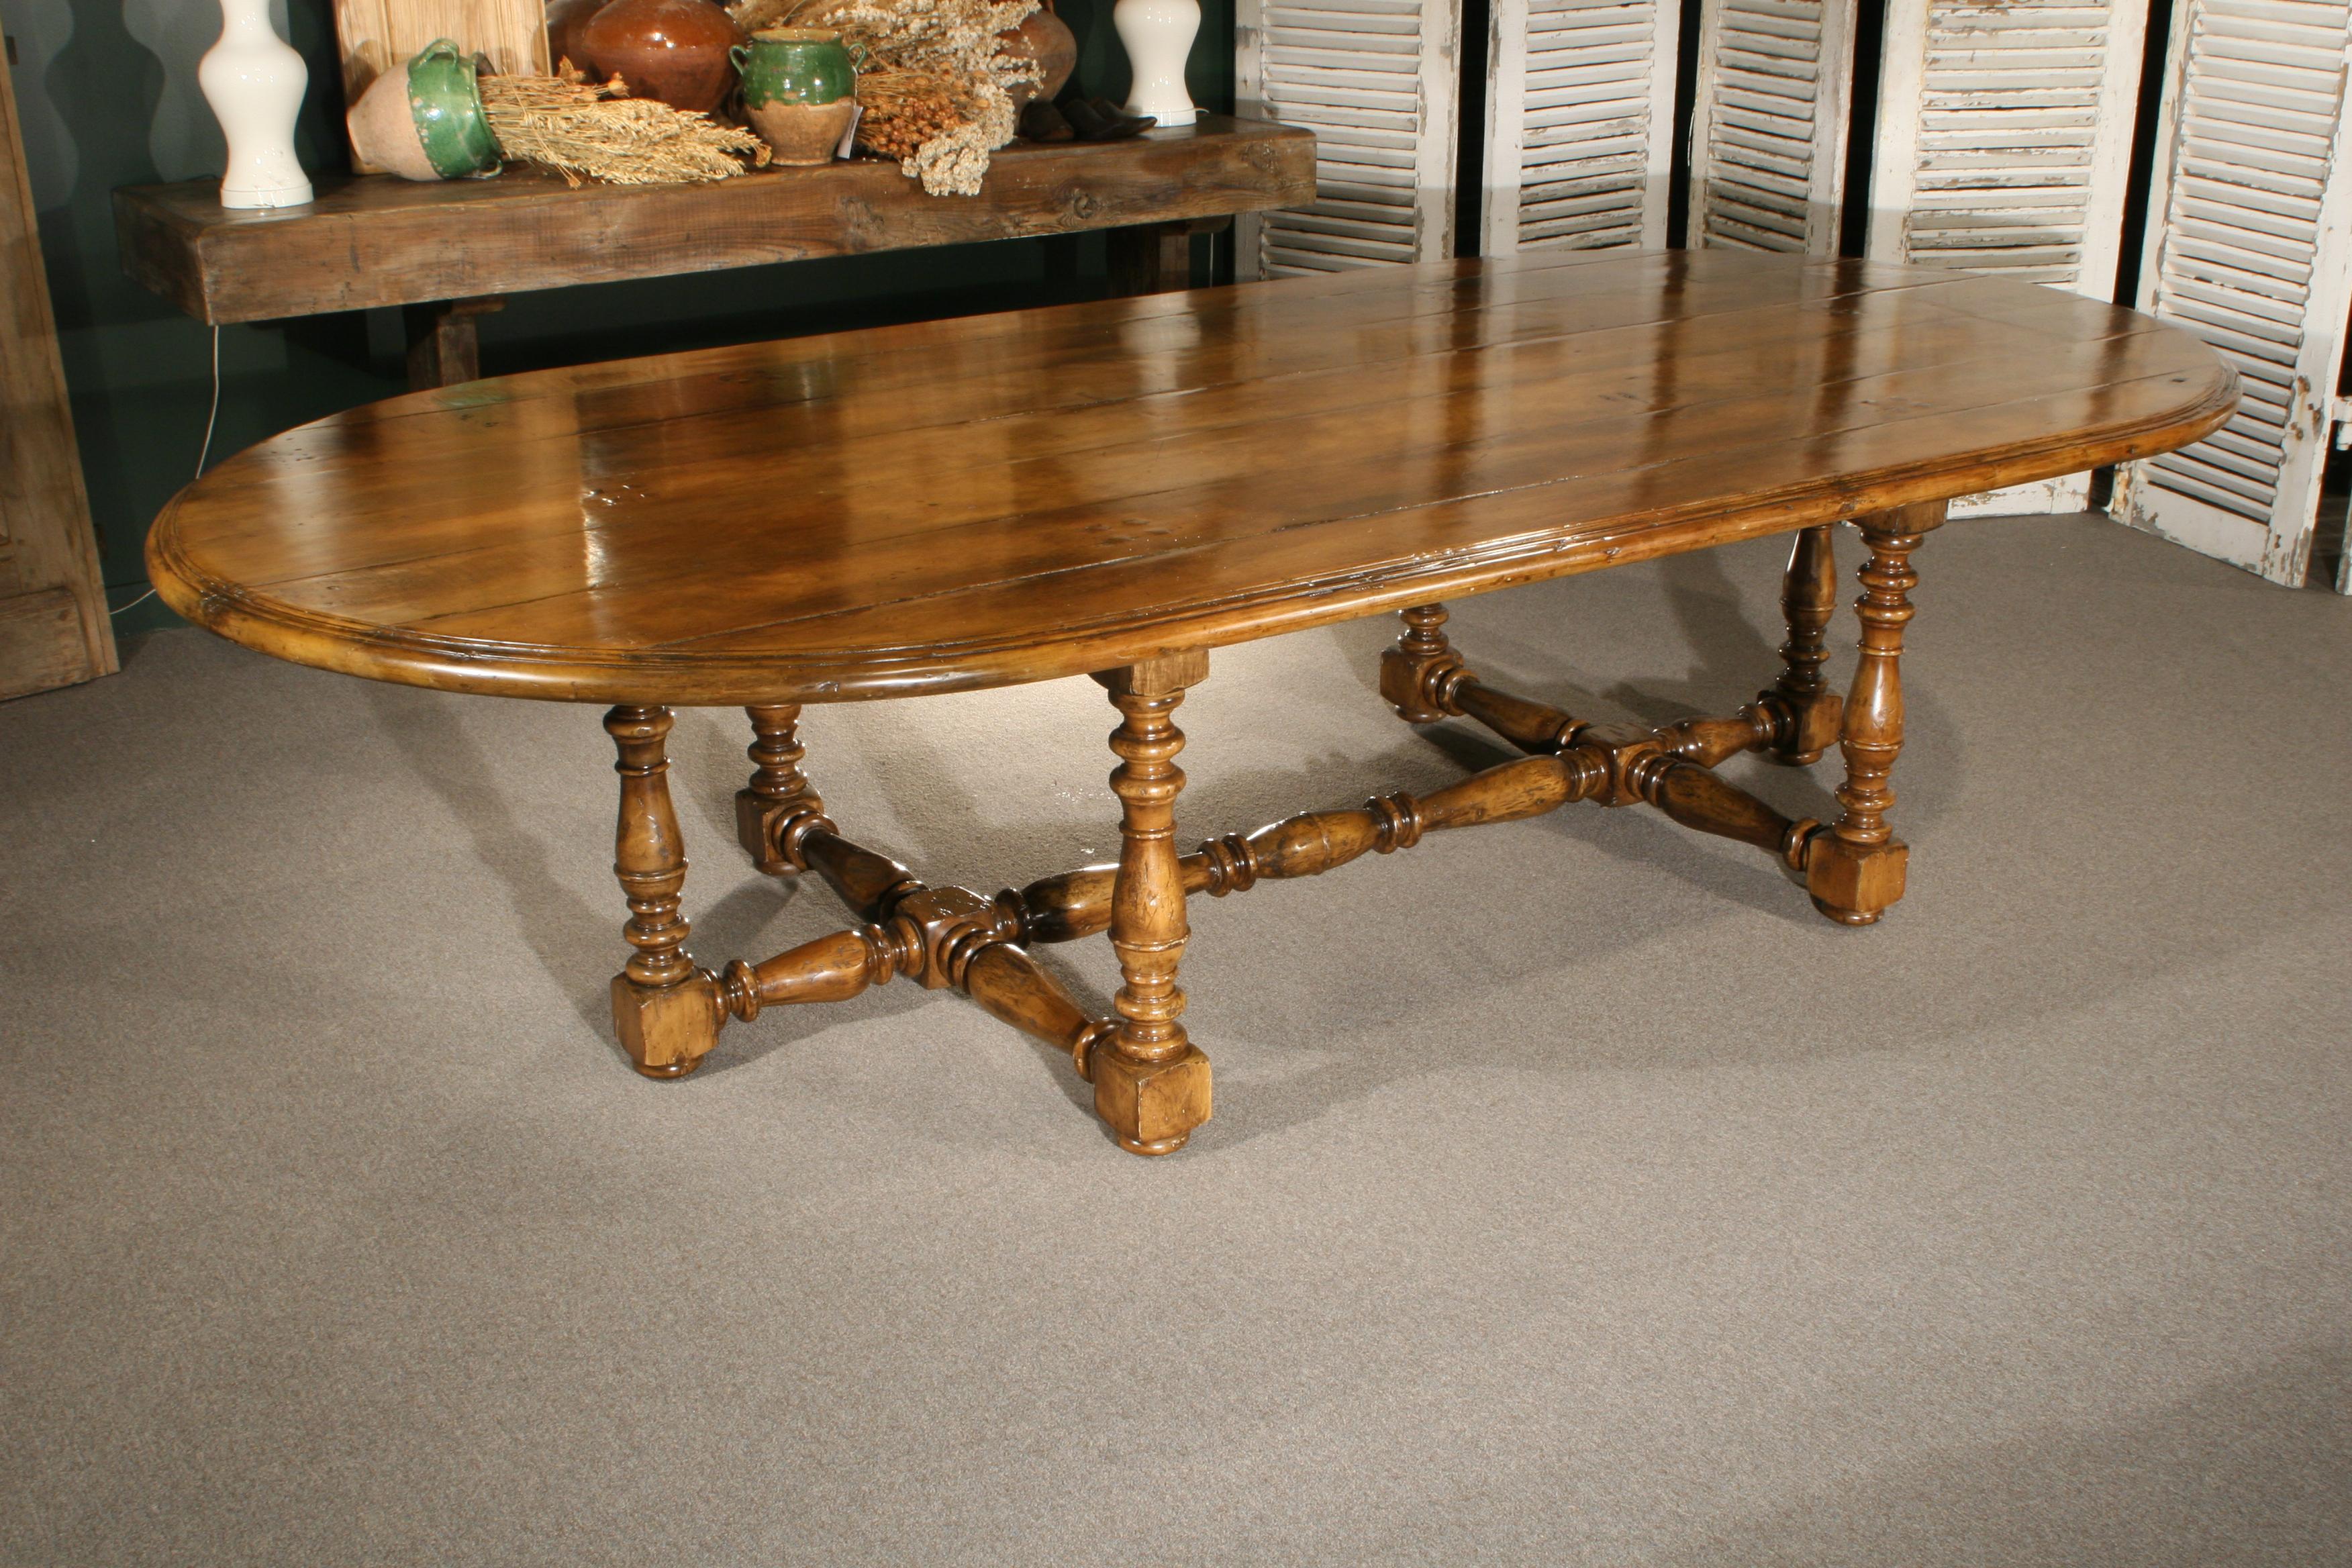 This table was inspired by an antique found in Paris. It can easily seat 10 to 12 and  maybe squeeze more at holidays!  The Rouen is made of solid maple, and distressed and colored to a rich golden hue.   The table available is a showroom sample